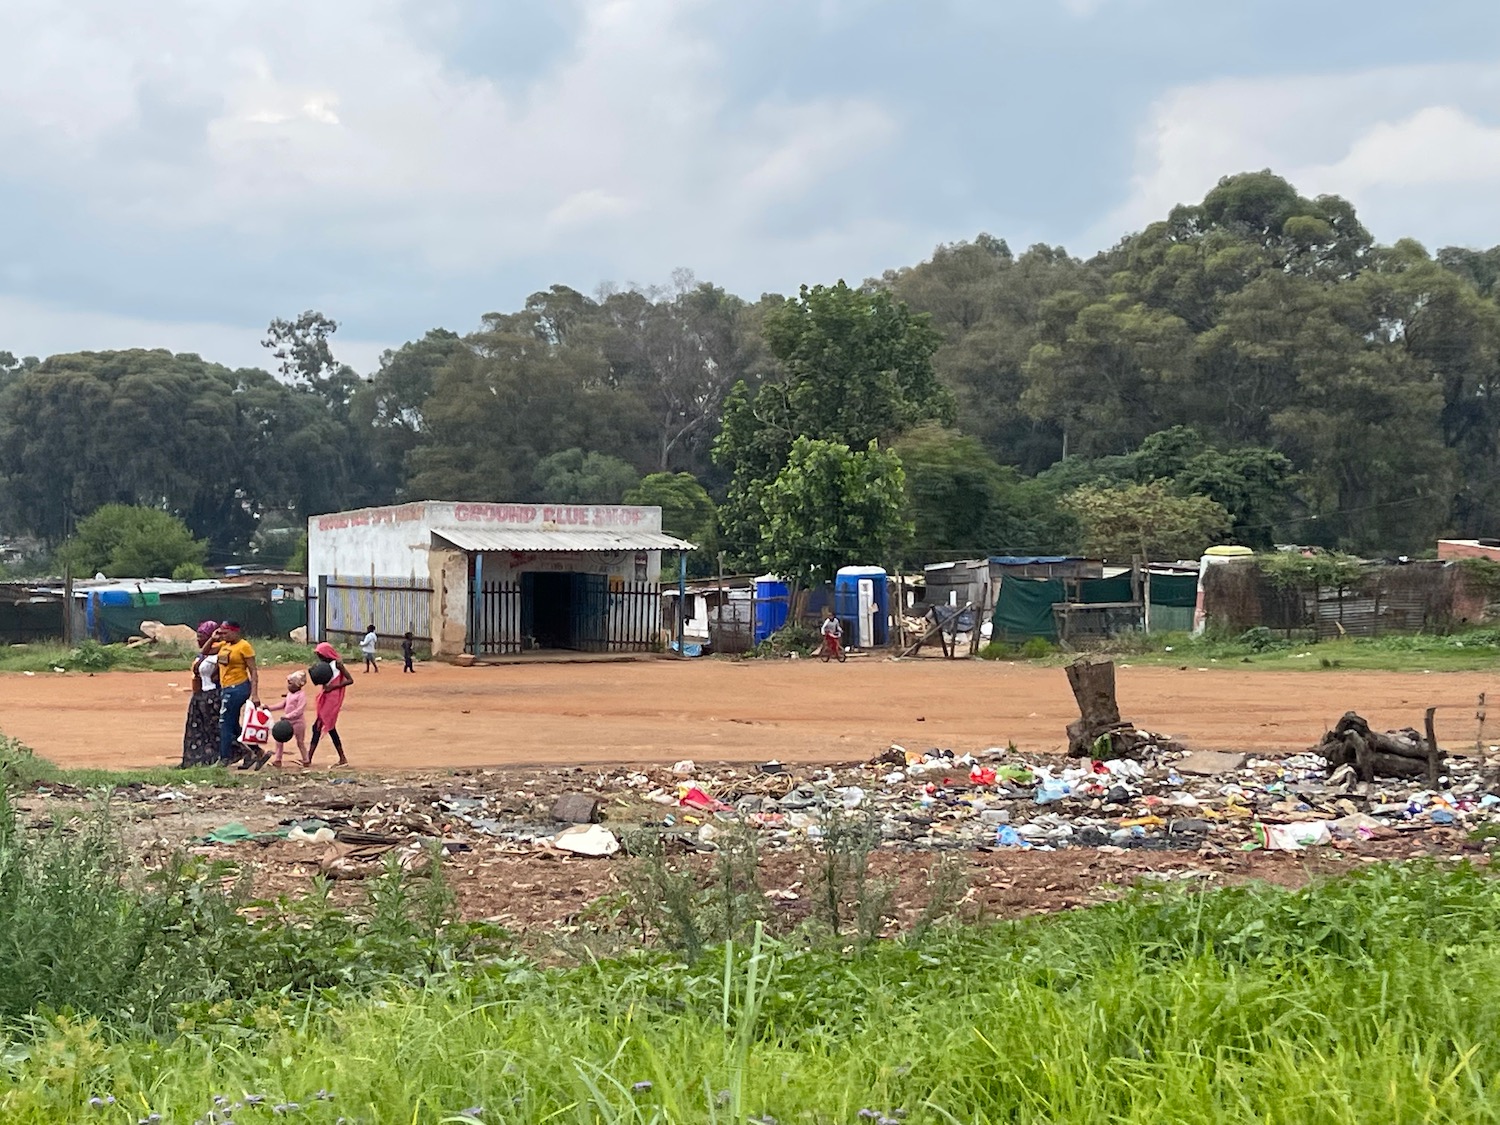 a group of people standing in a dirt field with trash and a building